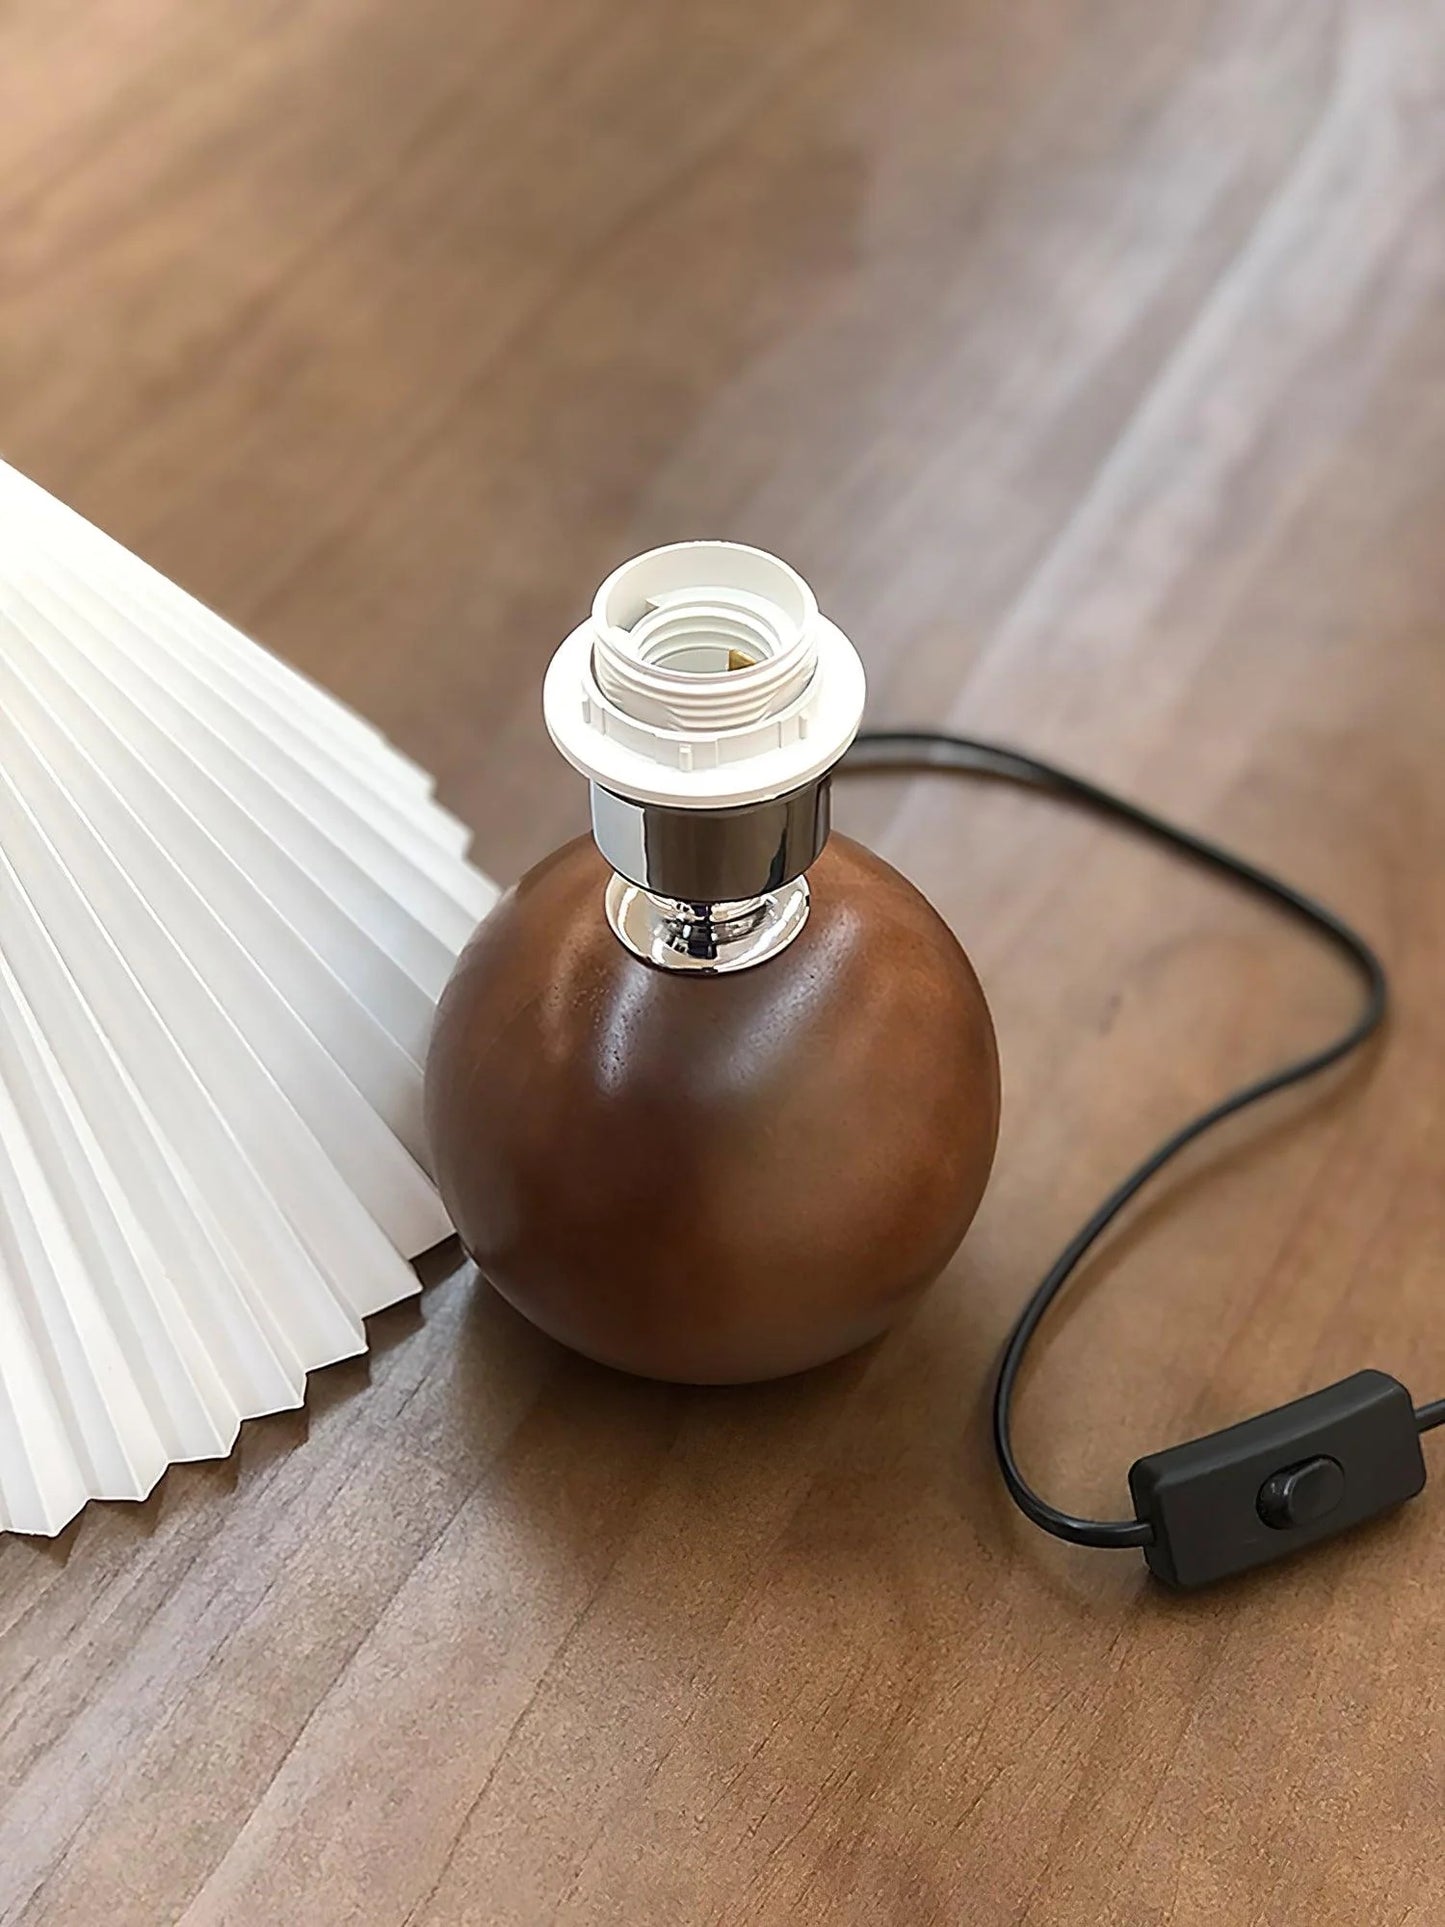 Ballet pleated Table Lamp